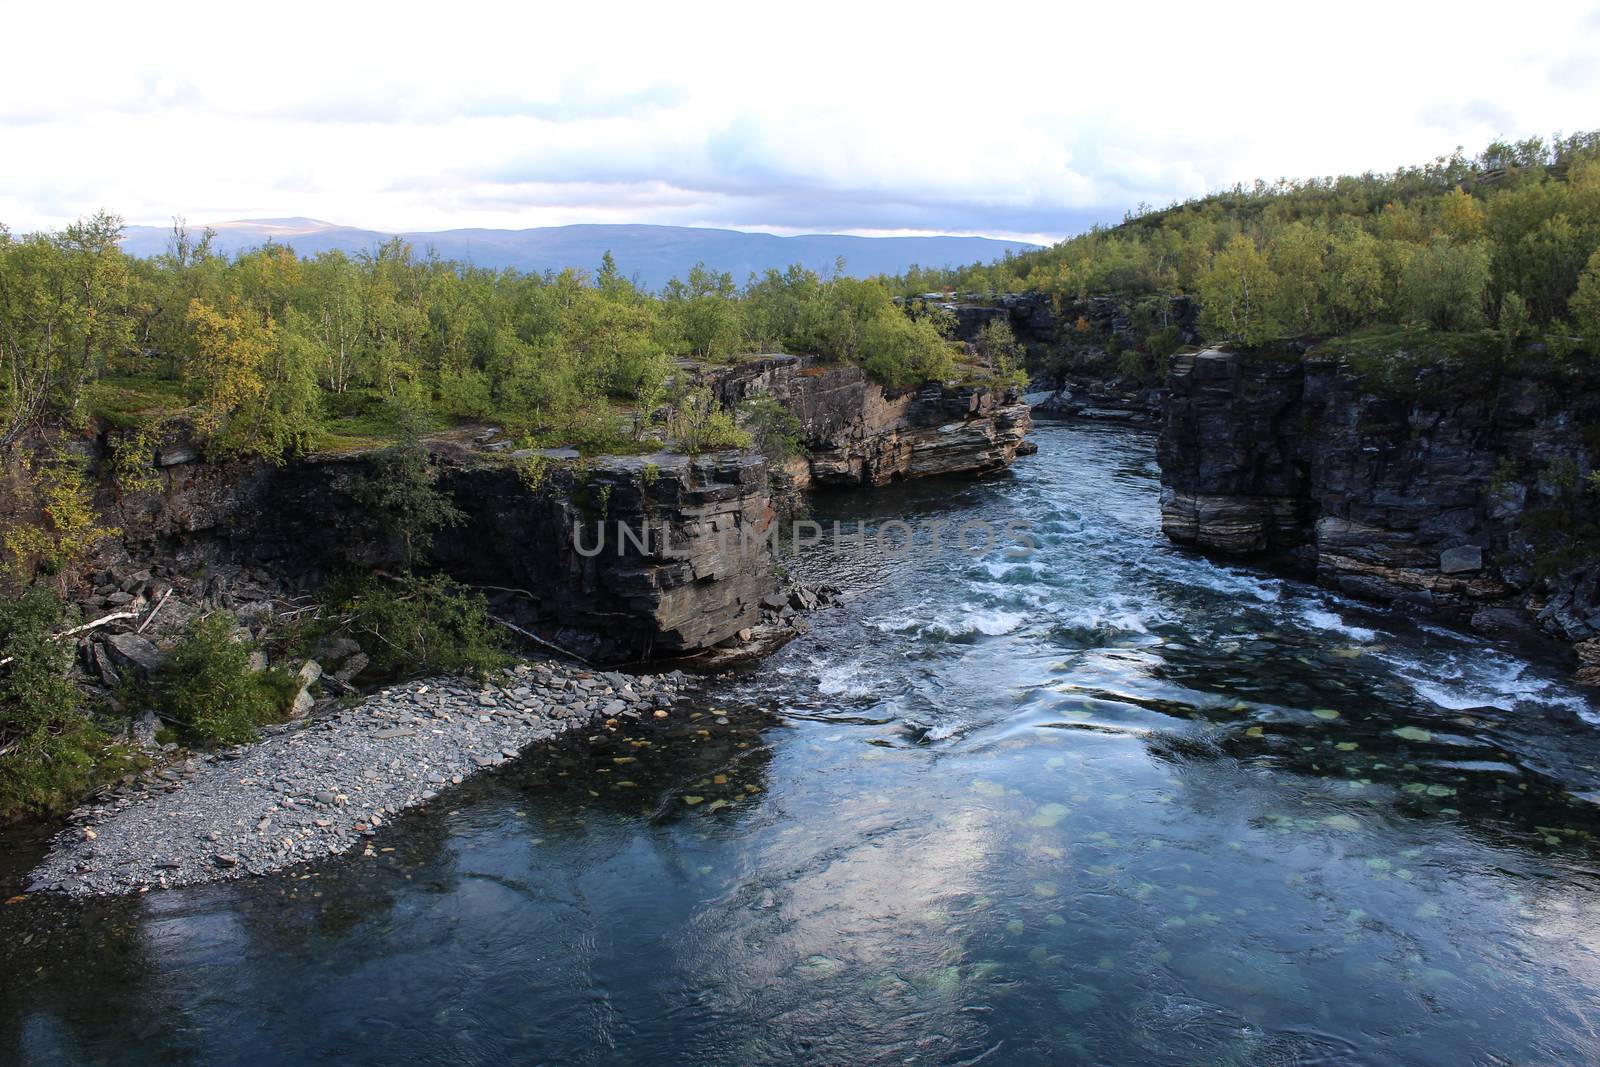 Overview of Kungsleden river in the arctic tundra. Abisko national park, Nothern Sweden